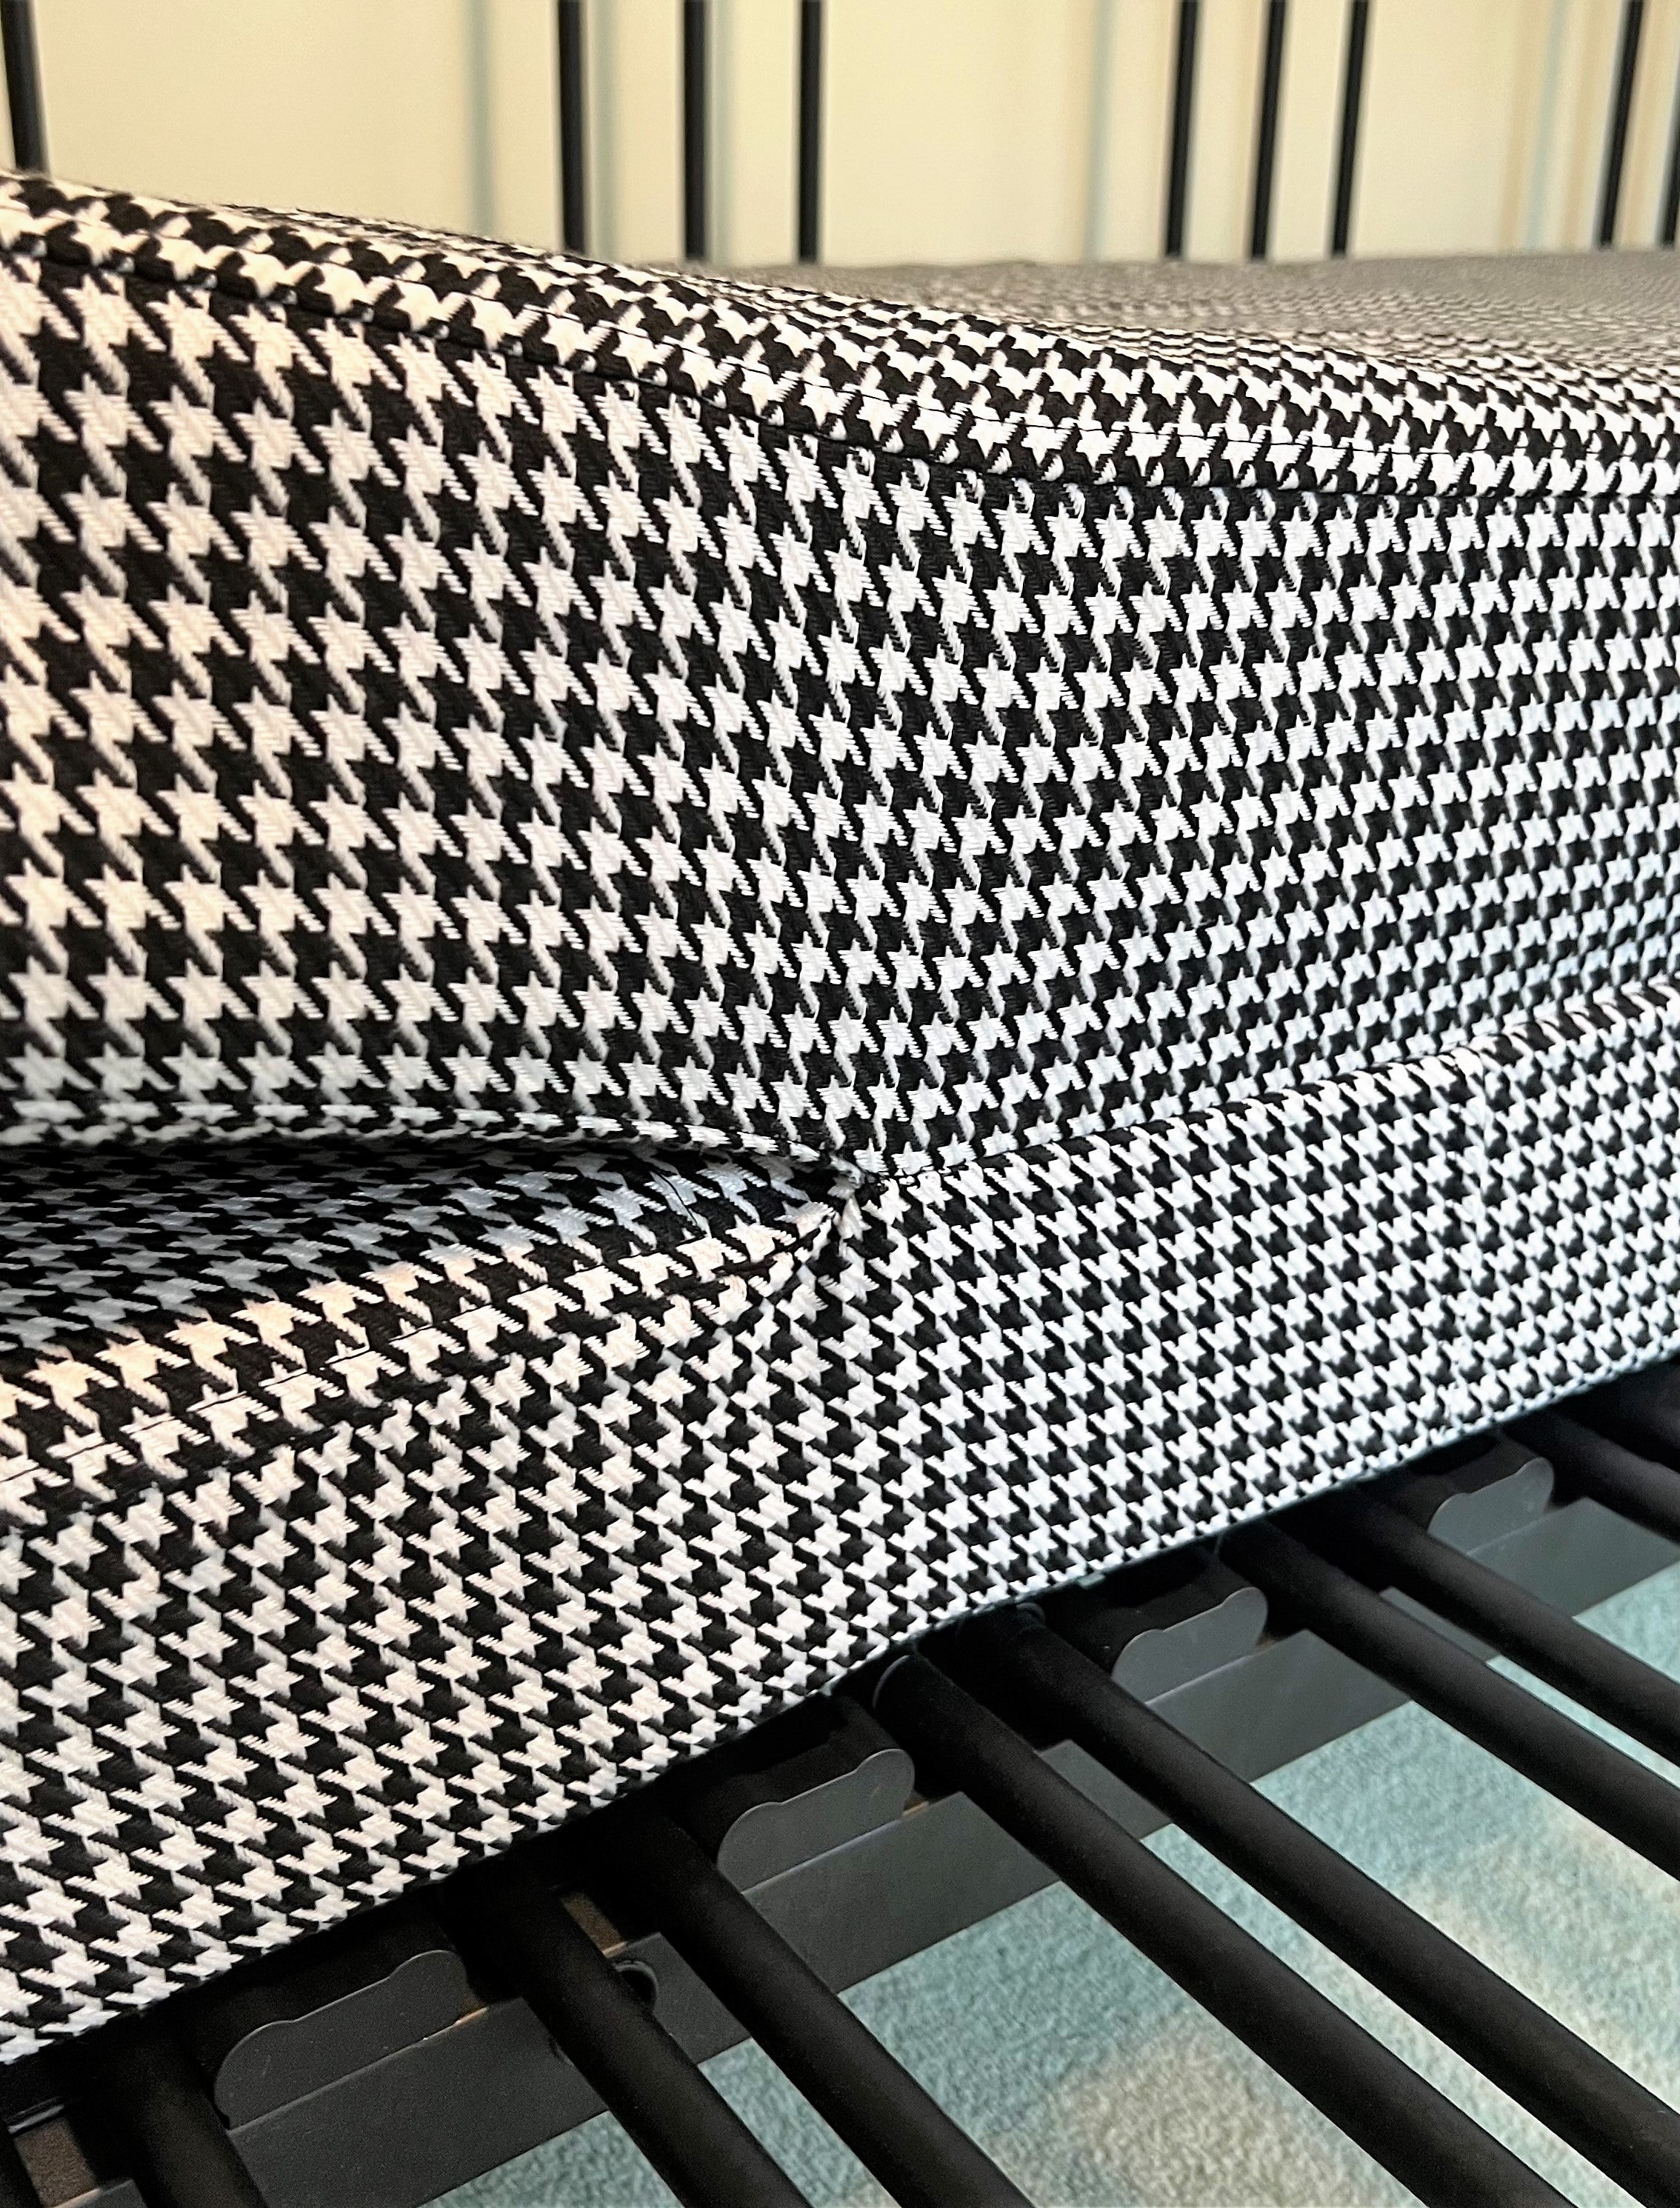 IKEA-DayBed-Sofa-Fitted-Bedsheet-double-Mattress-Cover-made-to-measure-custom-Fits-FYRESDAL-HEMNES-BRIMNES-FLEKKE-cosy-burrows-dogtooth-fabric-easy-folding